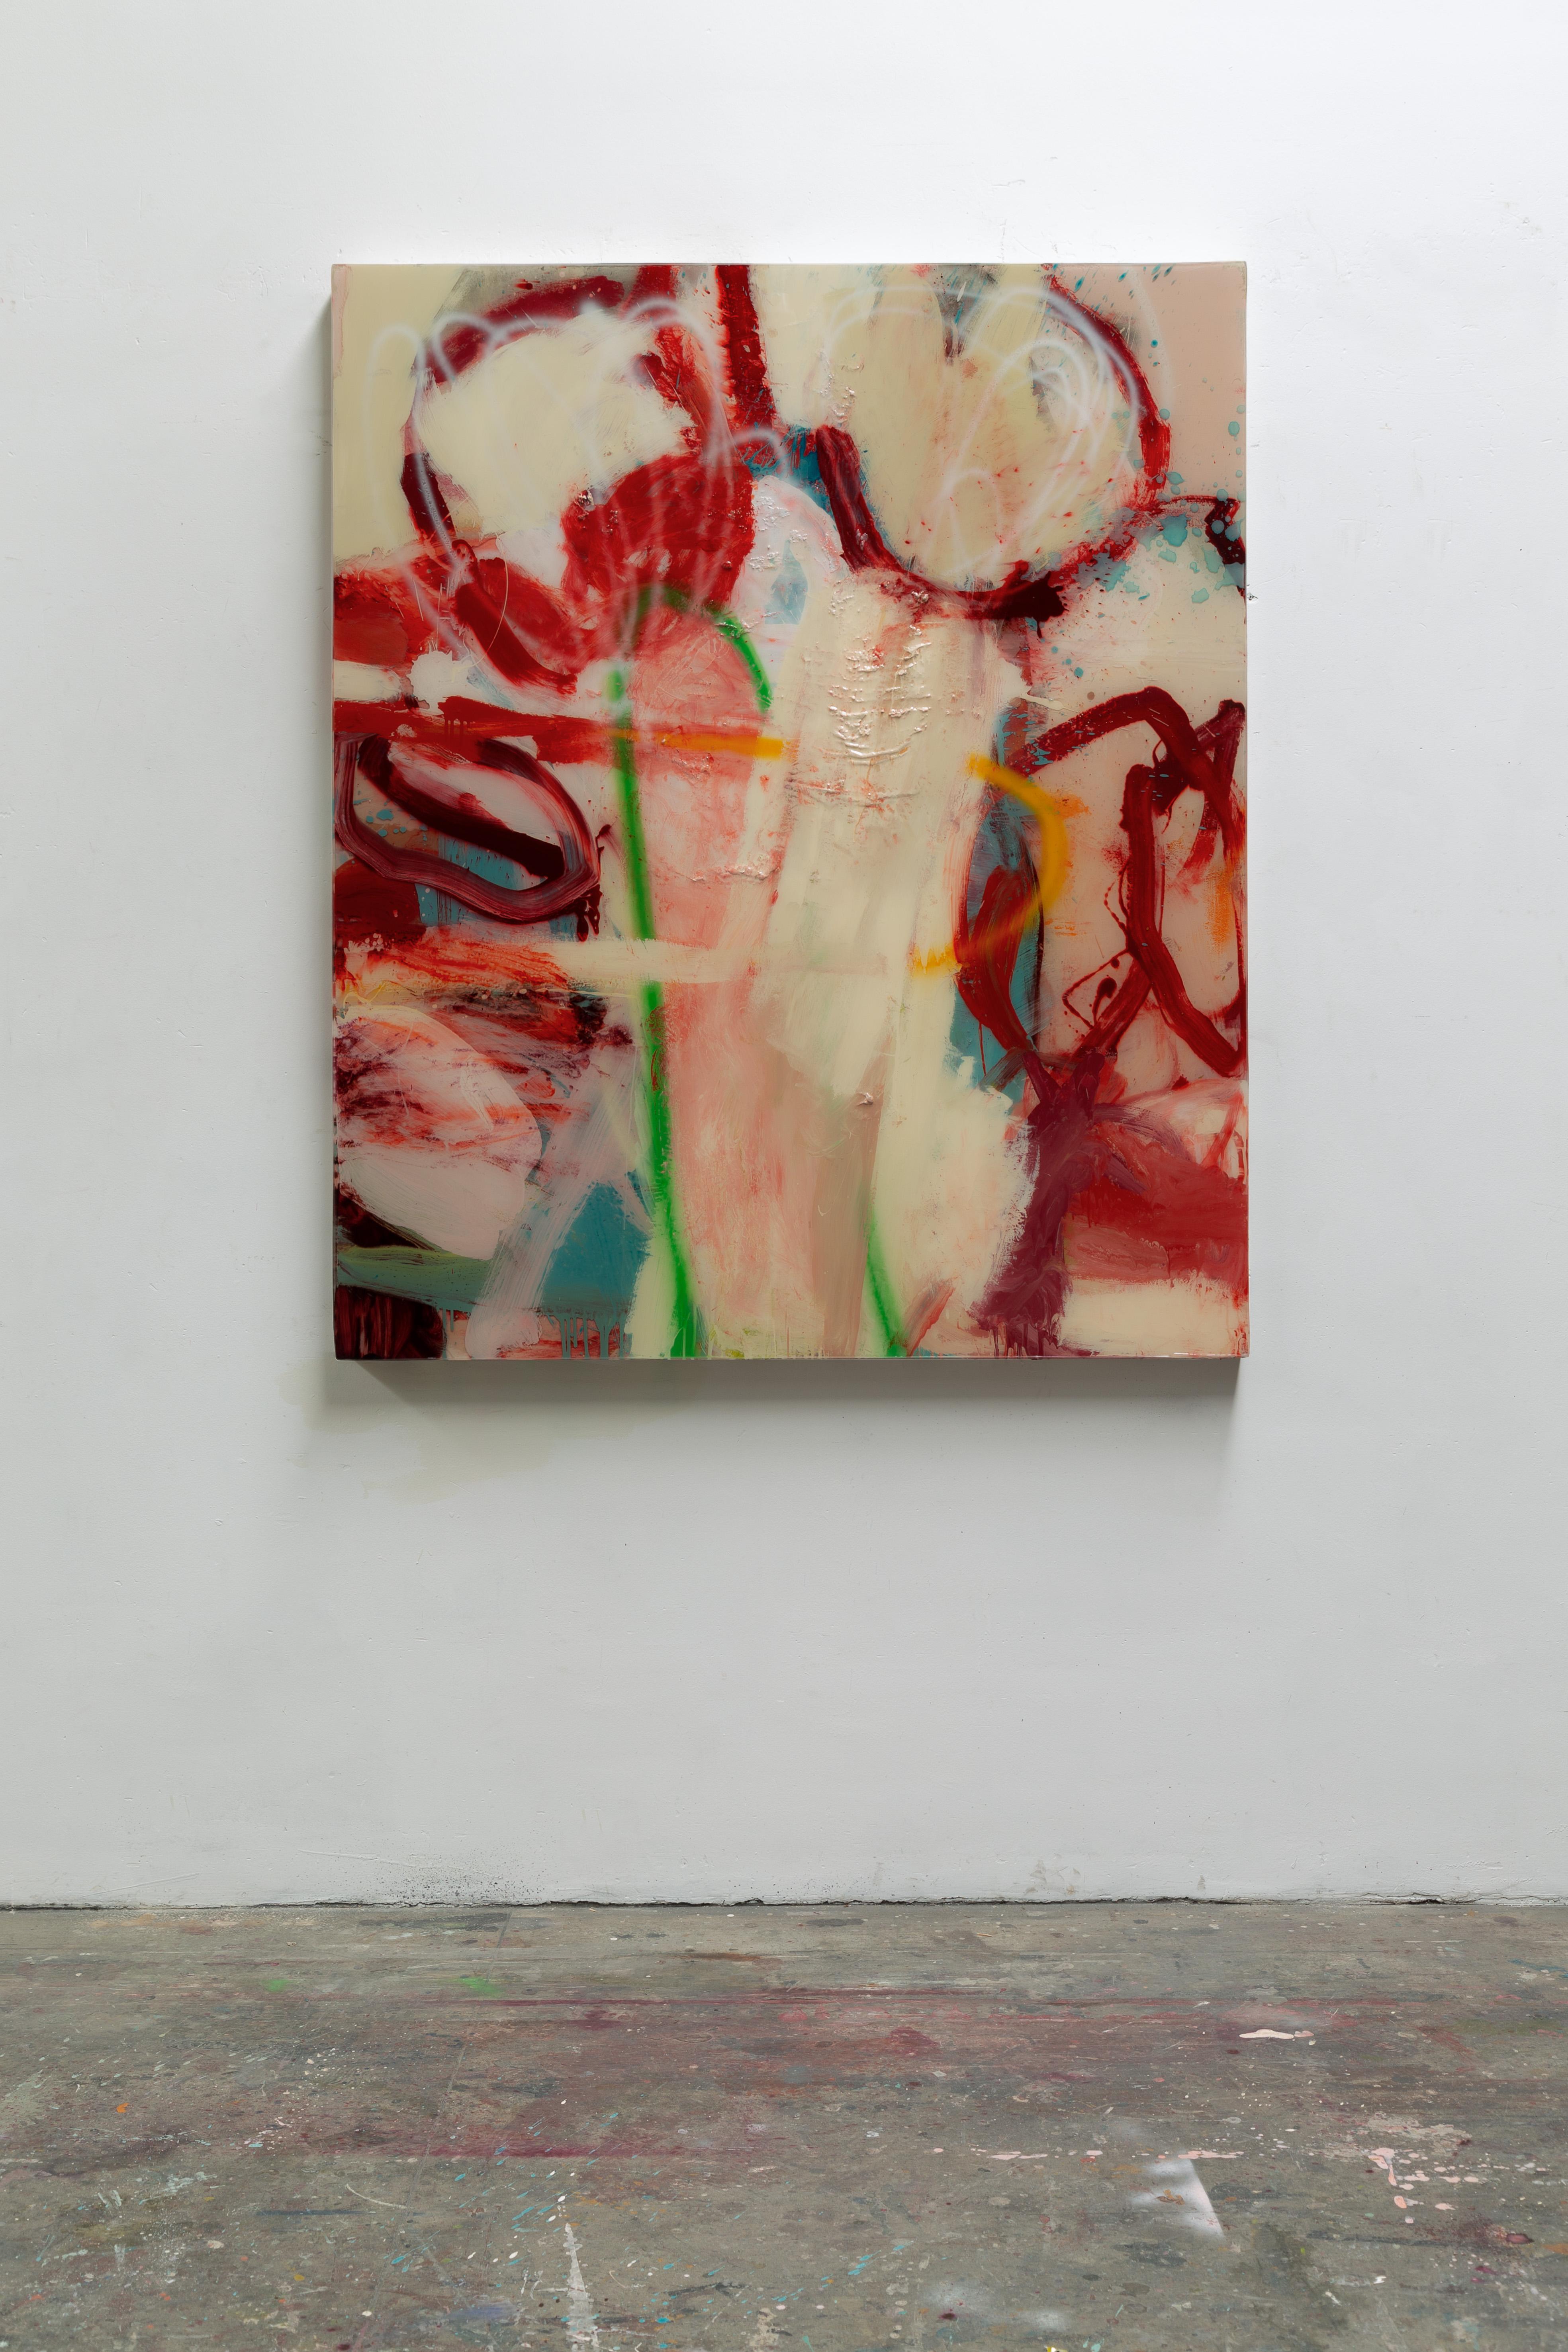 While visually maintaining a balance of chaos and control, Aurel K. Basedow’s paintings become a conversation between the rigid technical handling of resin, his chosen media, and the gestural possibilities of chromatic layering. Basedow most closely